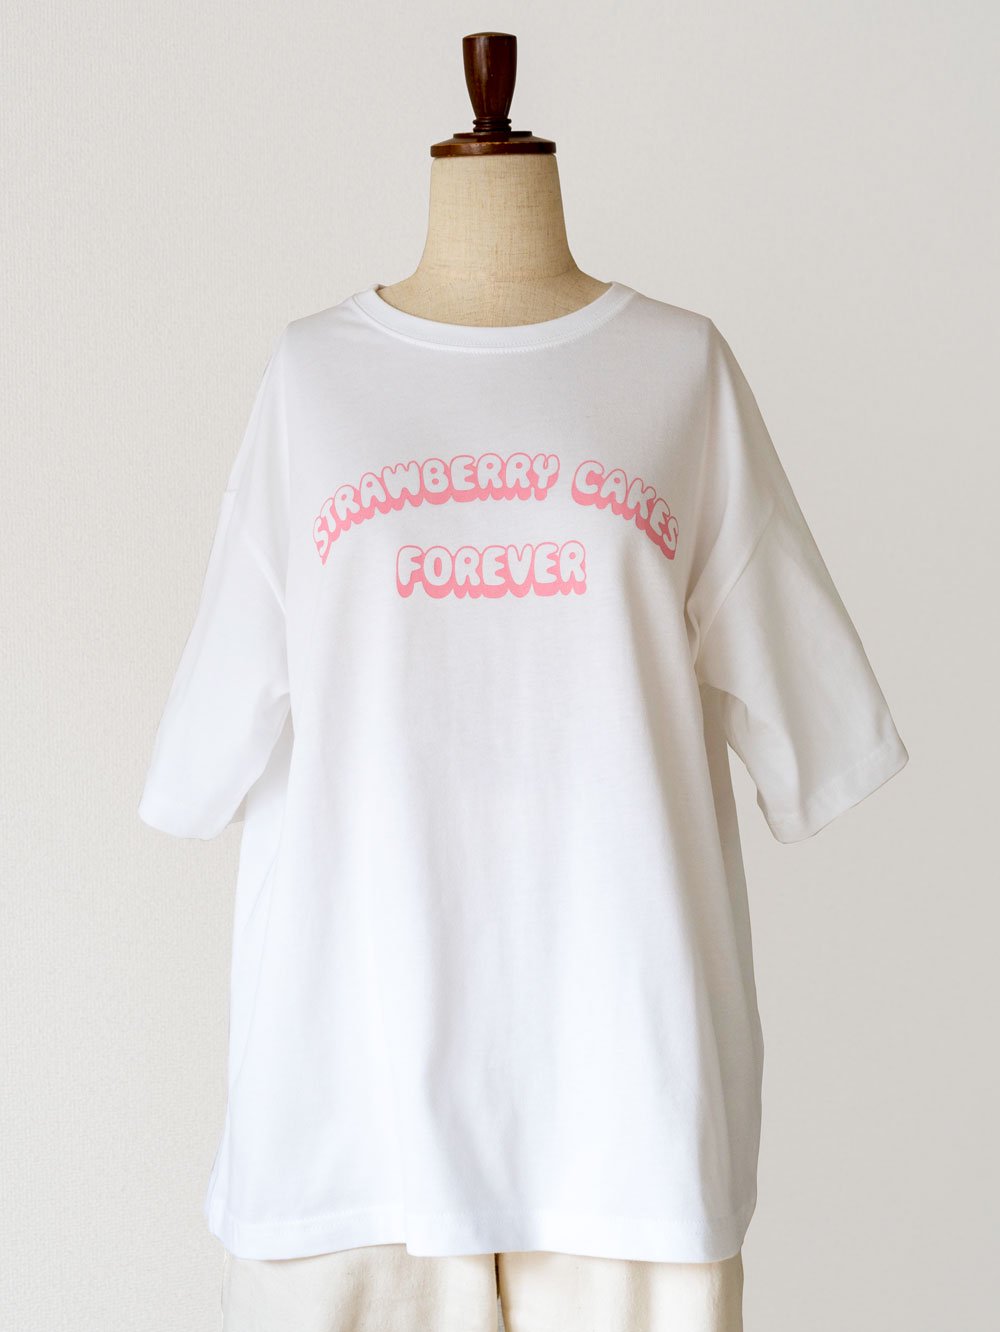 <img class='new_mark_img1' src='https://img.shop-pro.jp/img/new/icons8.gif' style='border:none;display:inline;margin:0px;padding:0px;width:auto;' />T-Shirt「STRAWBERRY CAKES FOREVER」ピンク